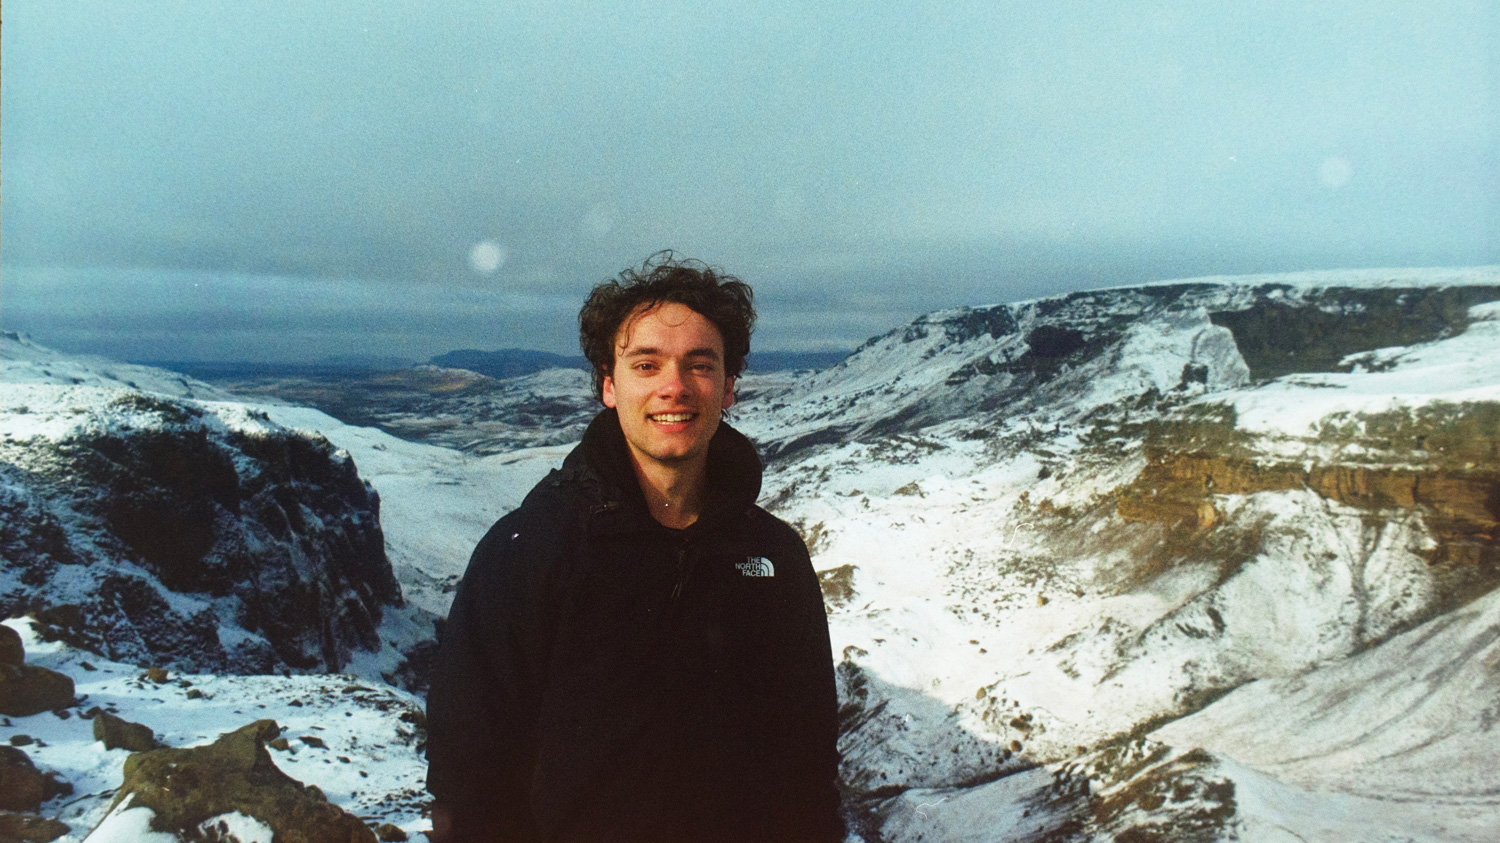 Student photo in Iceland, snowy hills in the background